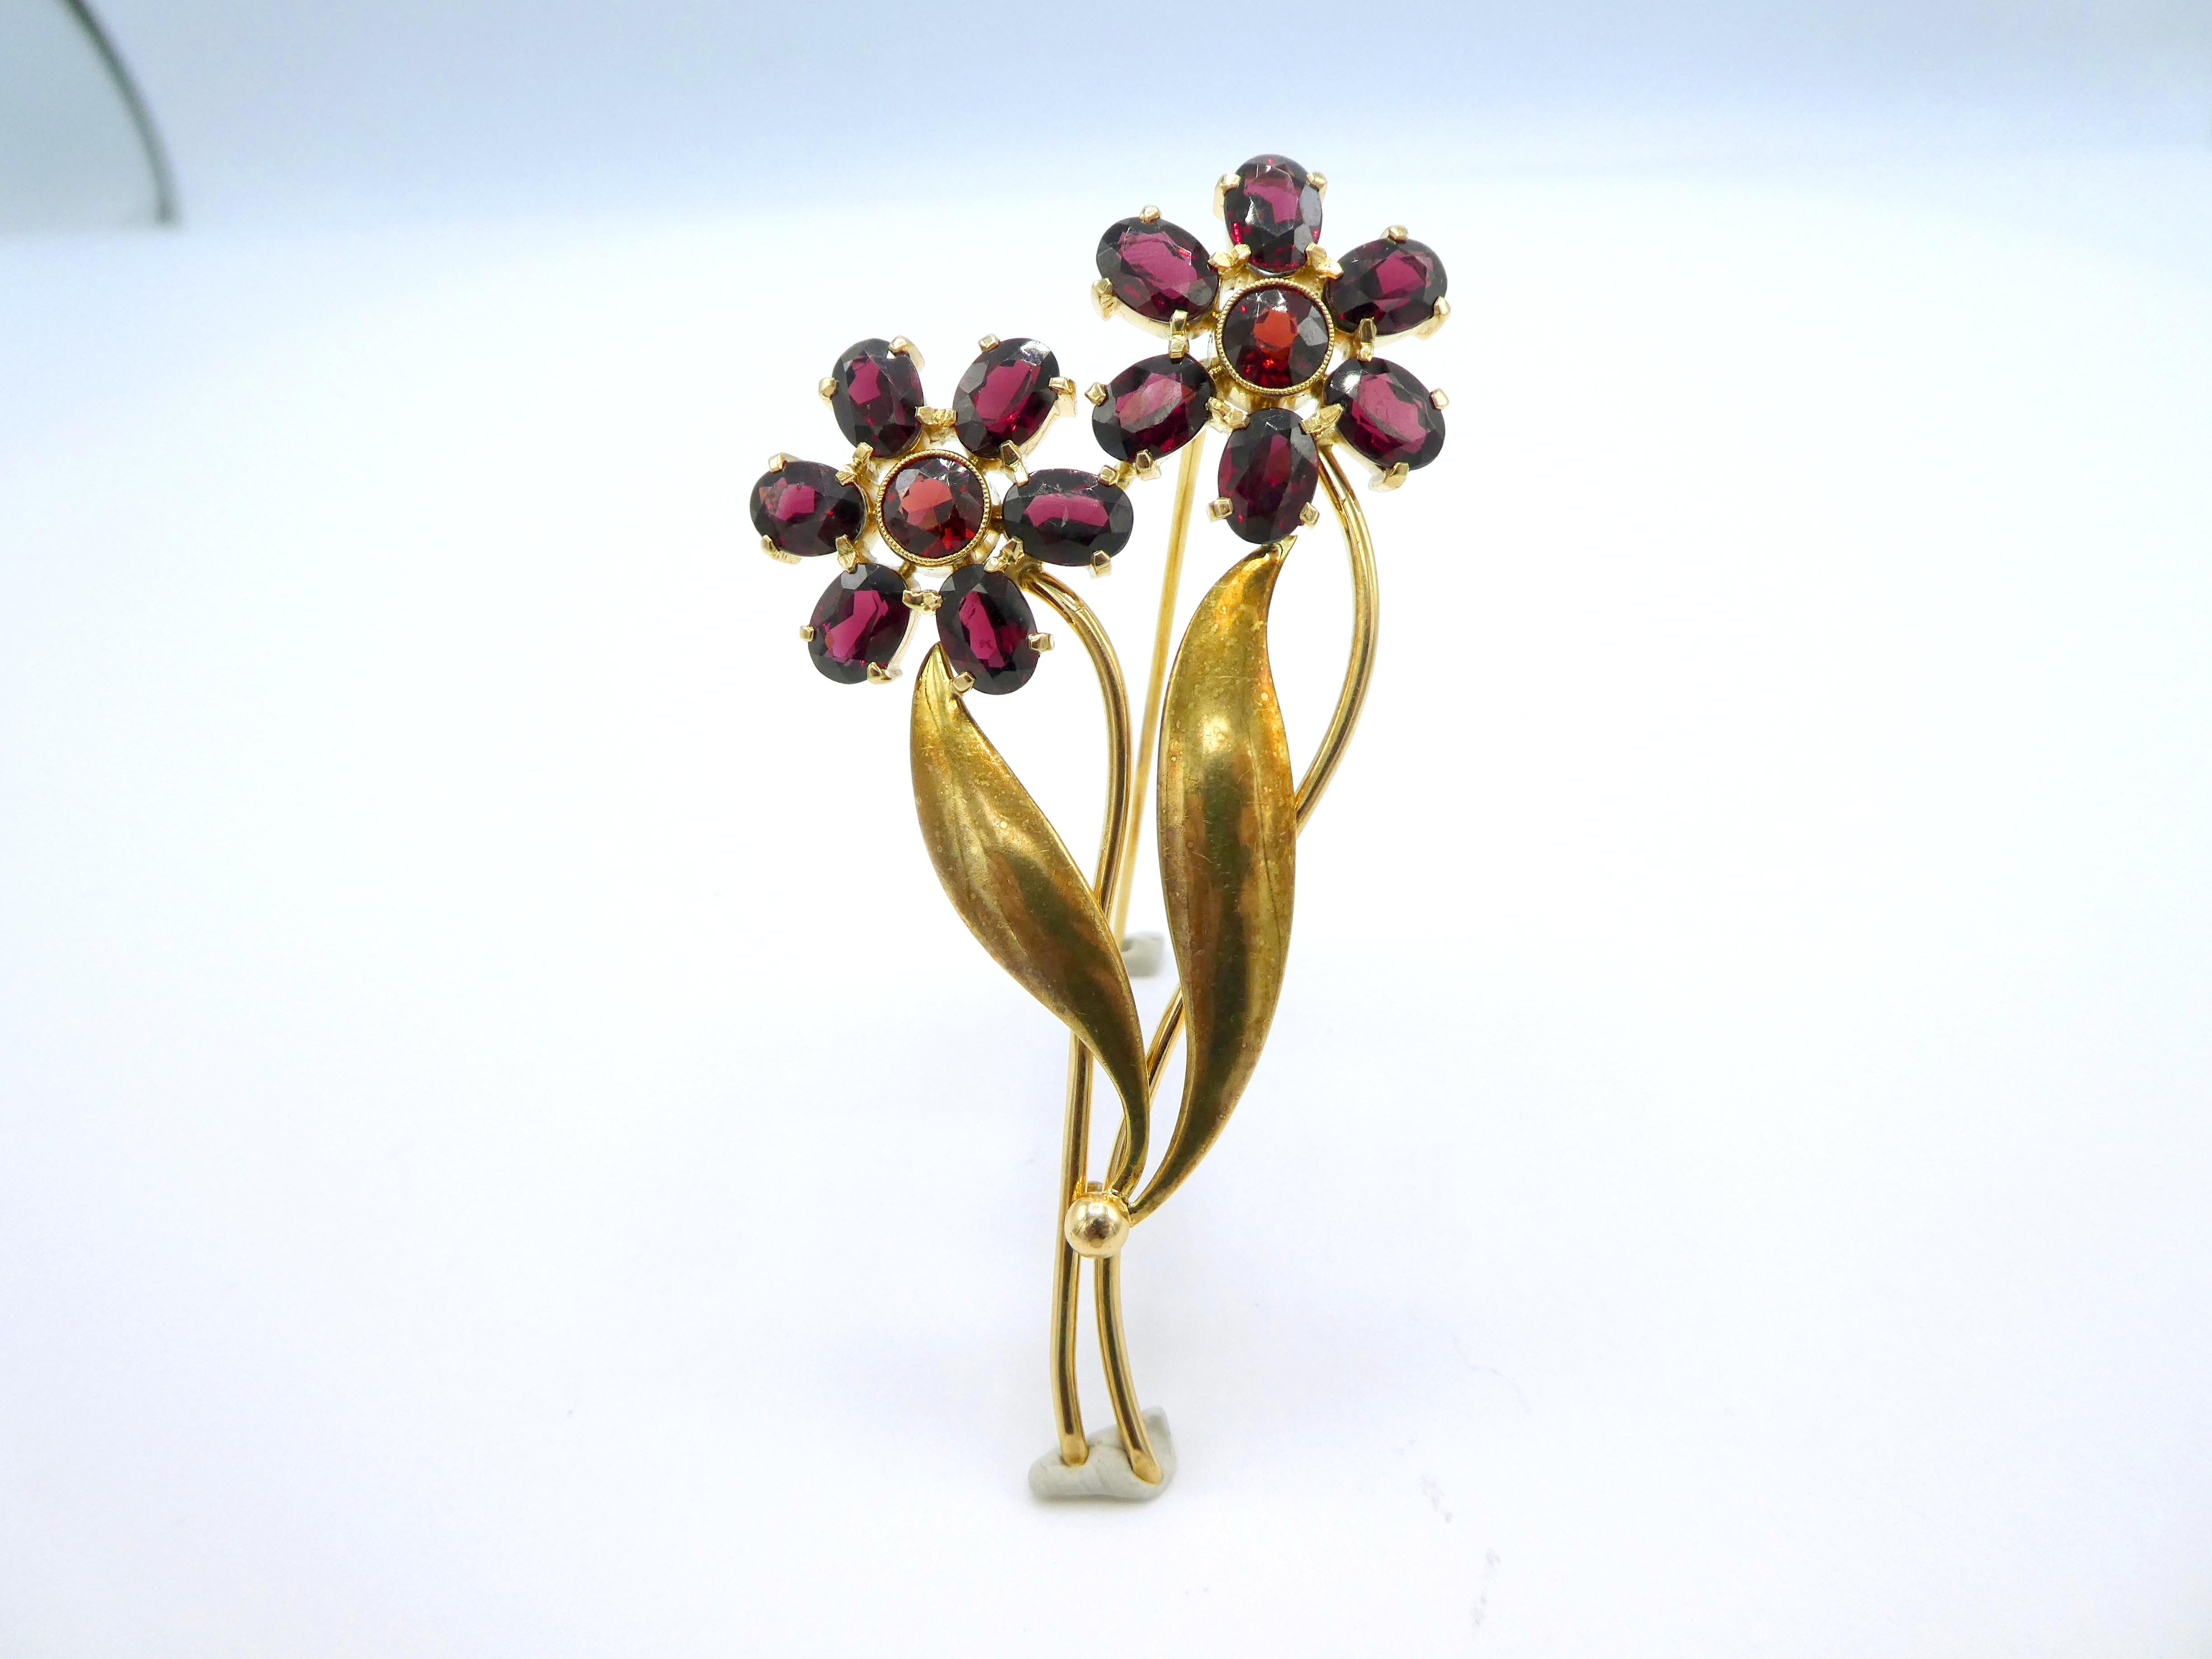 Tiffany & Co. 14 Karat Yellow Gold Garnet Flower Pin Brooch

Metal: 14K Yellow Gold
Weight: 14.62 grams
Gemstones: 14 Garnets, eye-clean
Length: 7.5 cm
Width: 4 cm
Signed: Tiffany & Co. 14K

Condition consistent with age, approx. circa 1960s